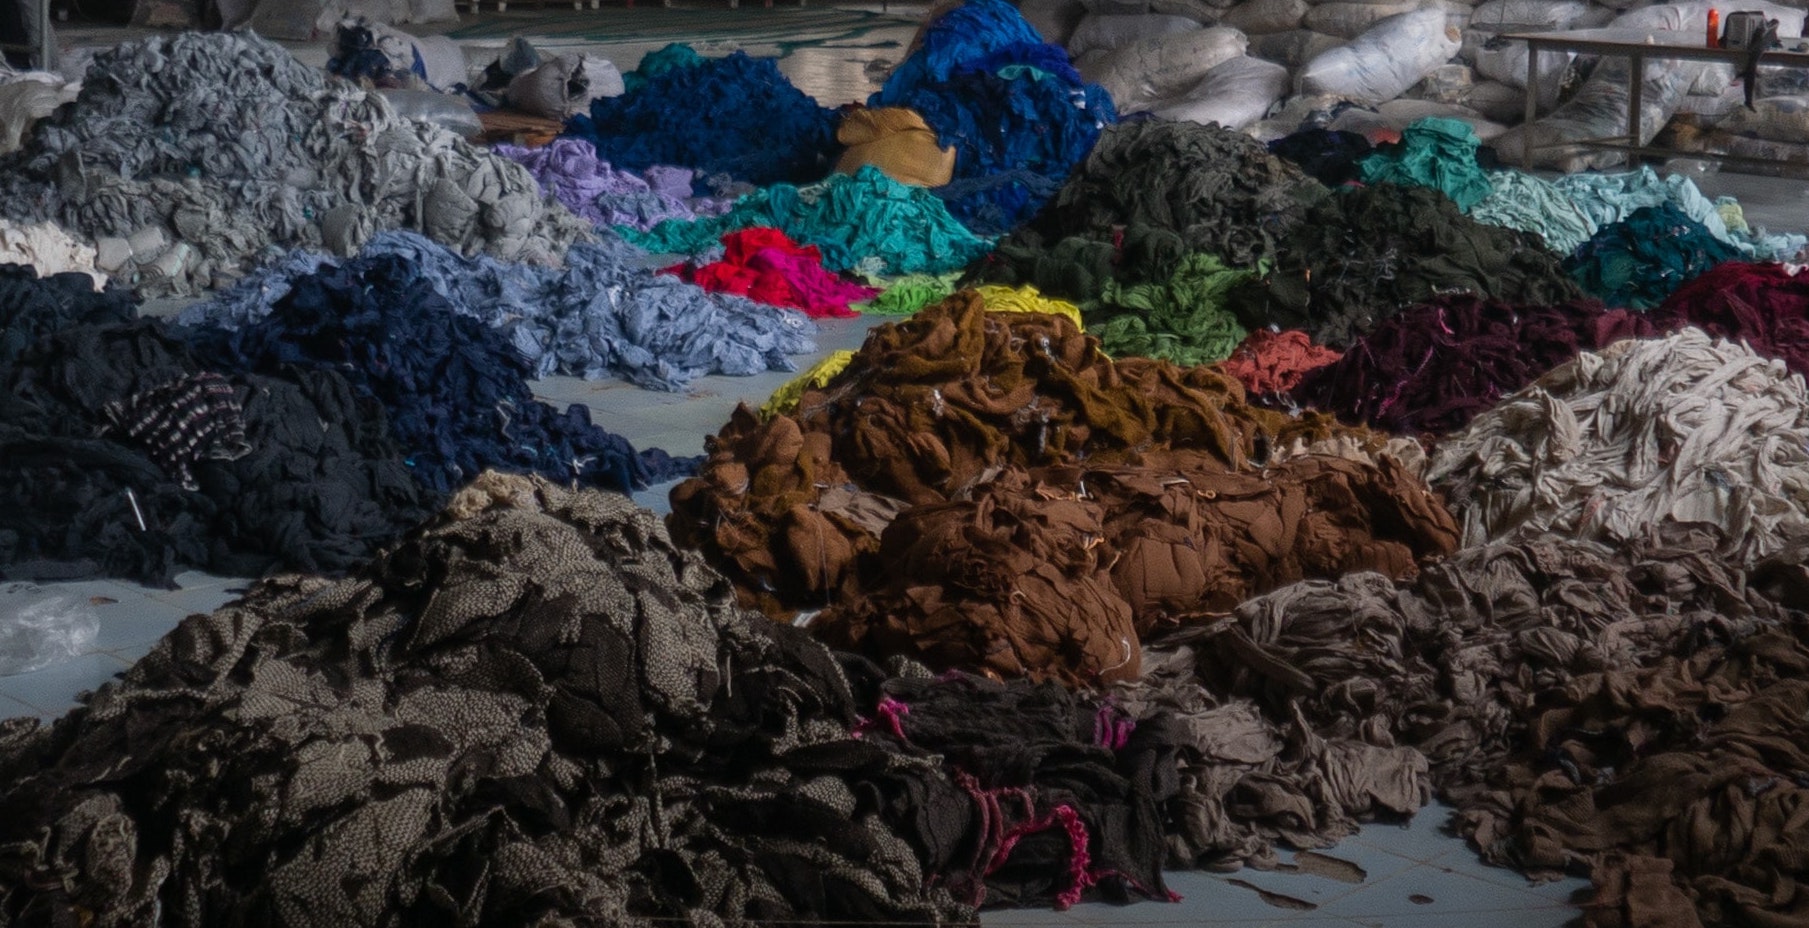 Hundreds of tons of fabric found at an abandoned factory in Cambodia. Photo by&nbsp;<a href="https://unsplash.com/@flenguyen" class="_3XzpS _1ByhS _4kjHg _1O9Y0 _3l__V _1CBrG xLon9">Francois Le Nguyen</a>